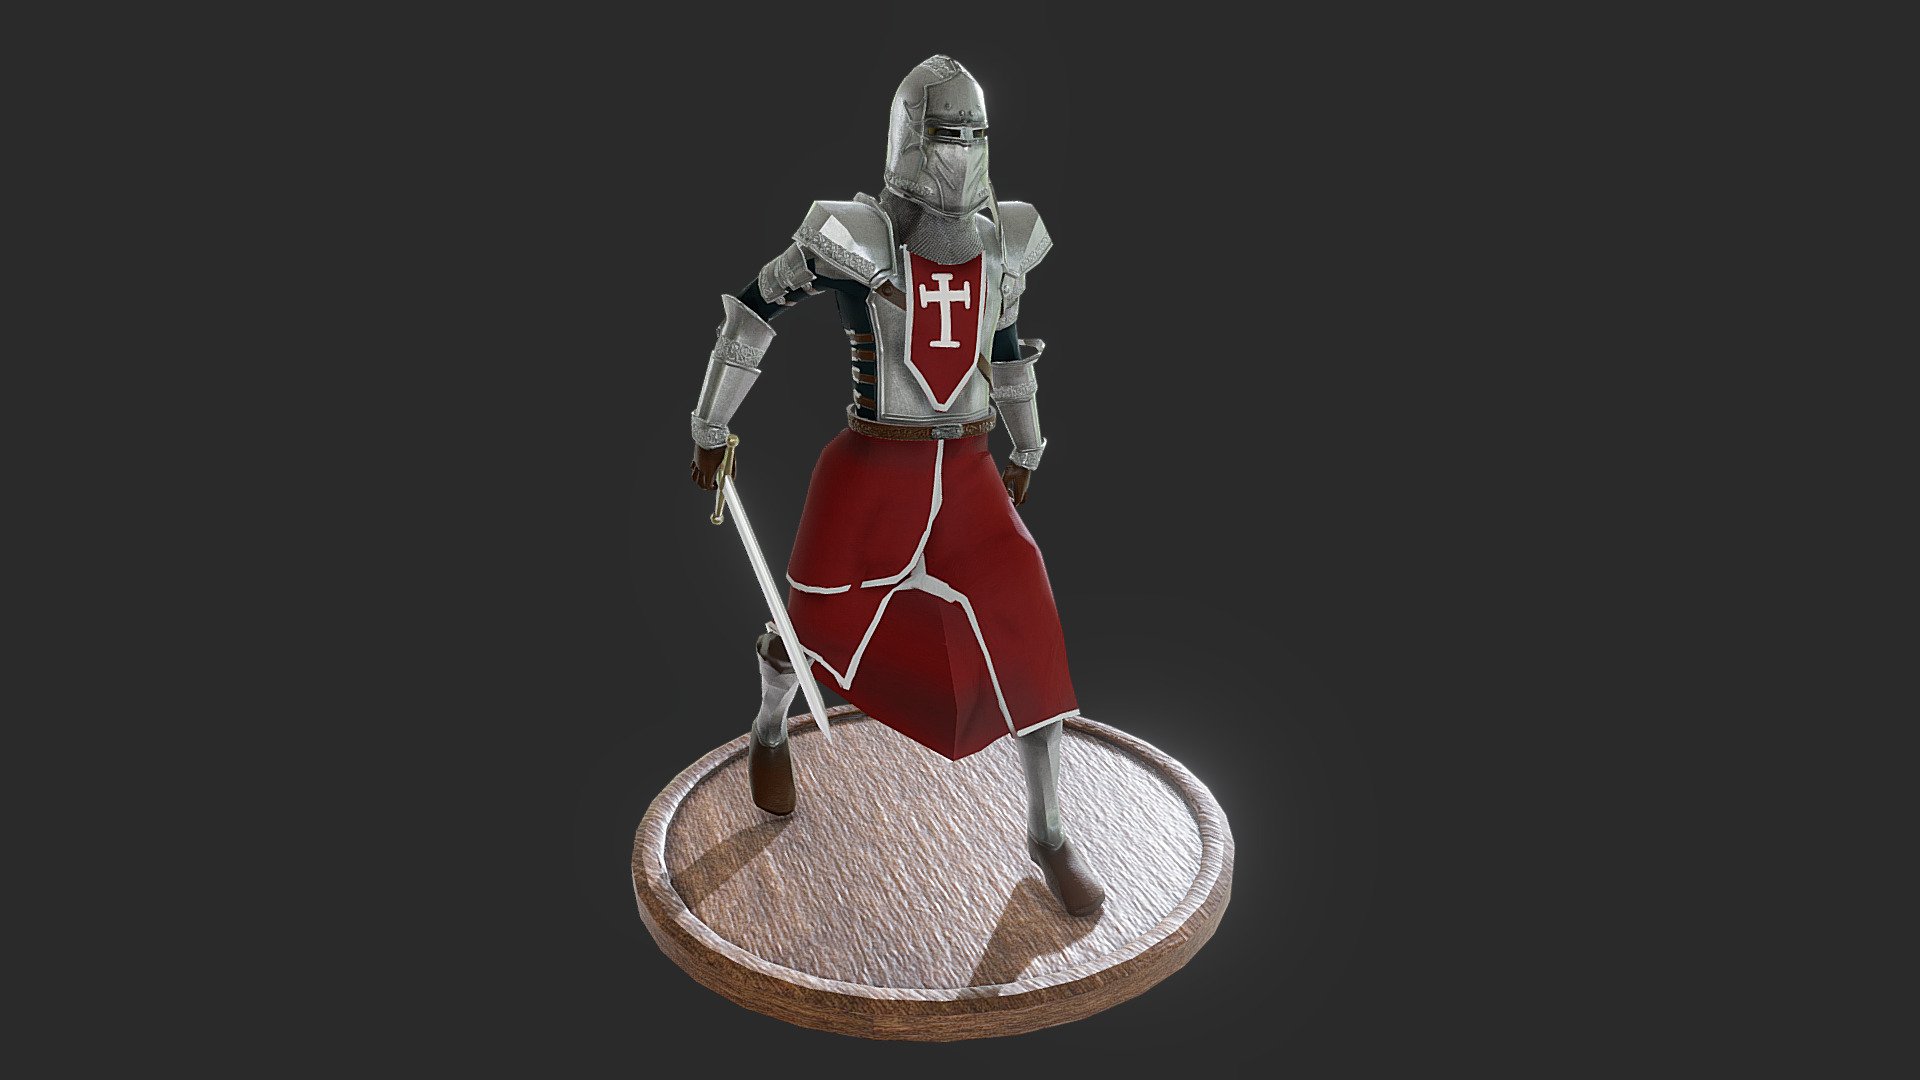 A model of a knight concept I am working on to better learn 3d modeling.  This model is work in progress to showcase my modeling skills.  I tried my best to make it pleasing as possible.  It is not rigged though.

If you want to use it download it for free.  :)  You are more than welcome to use it as you feel. 

Please let me know what you think 3d model